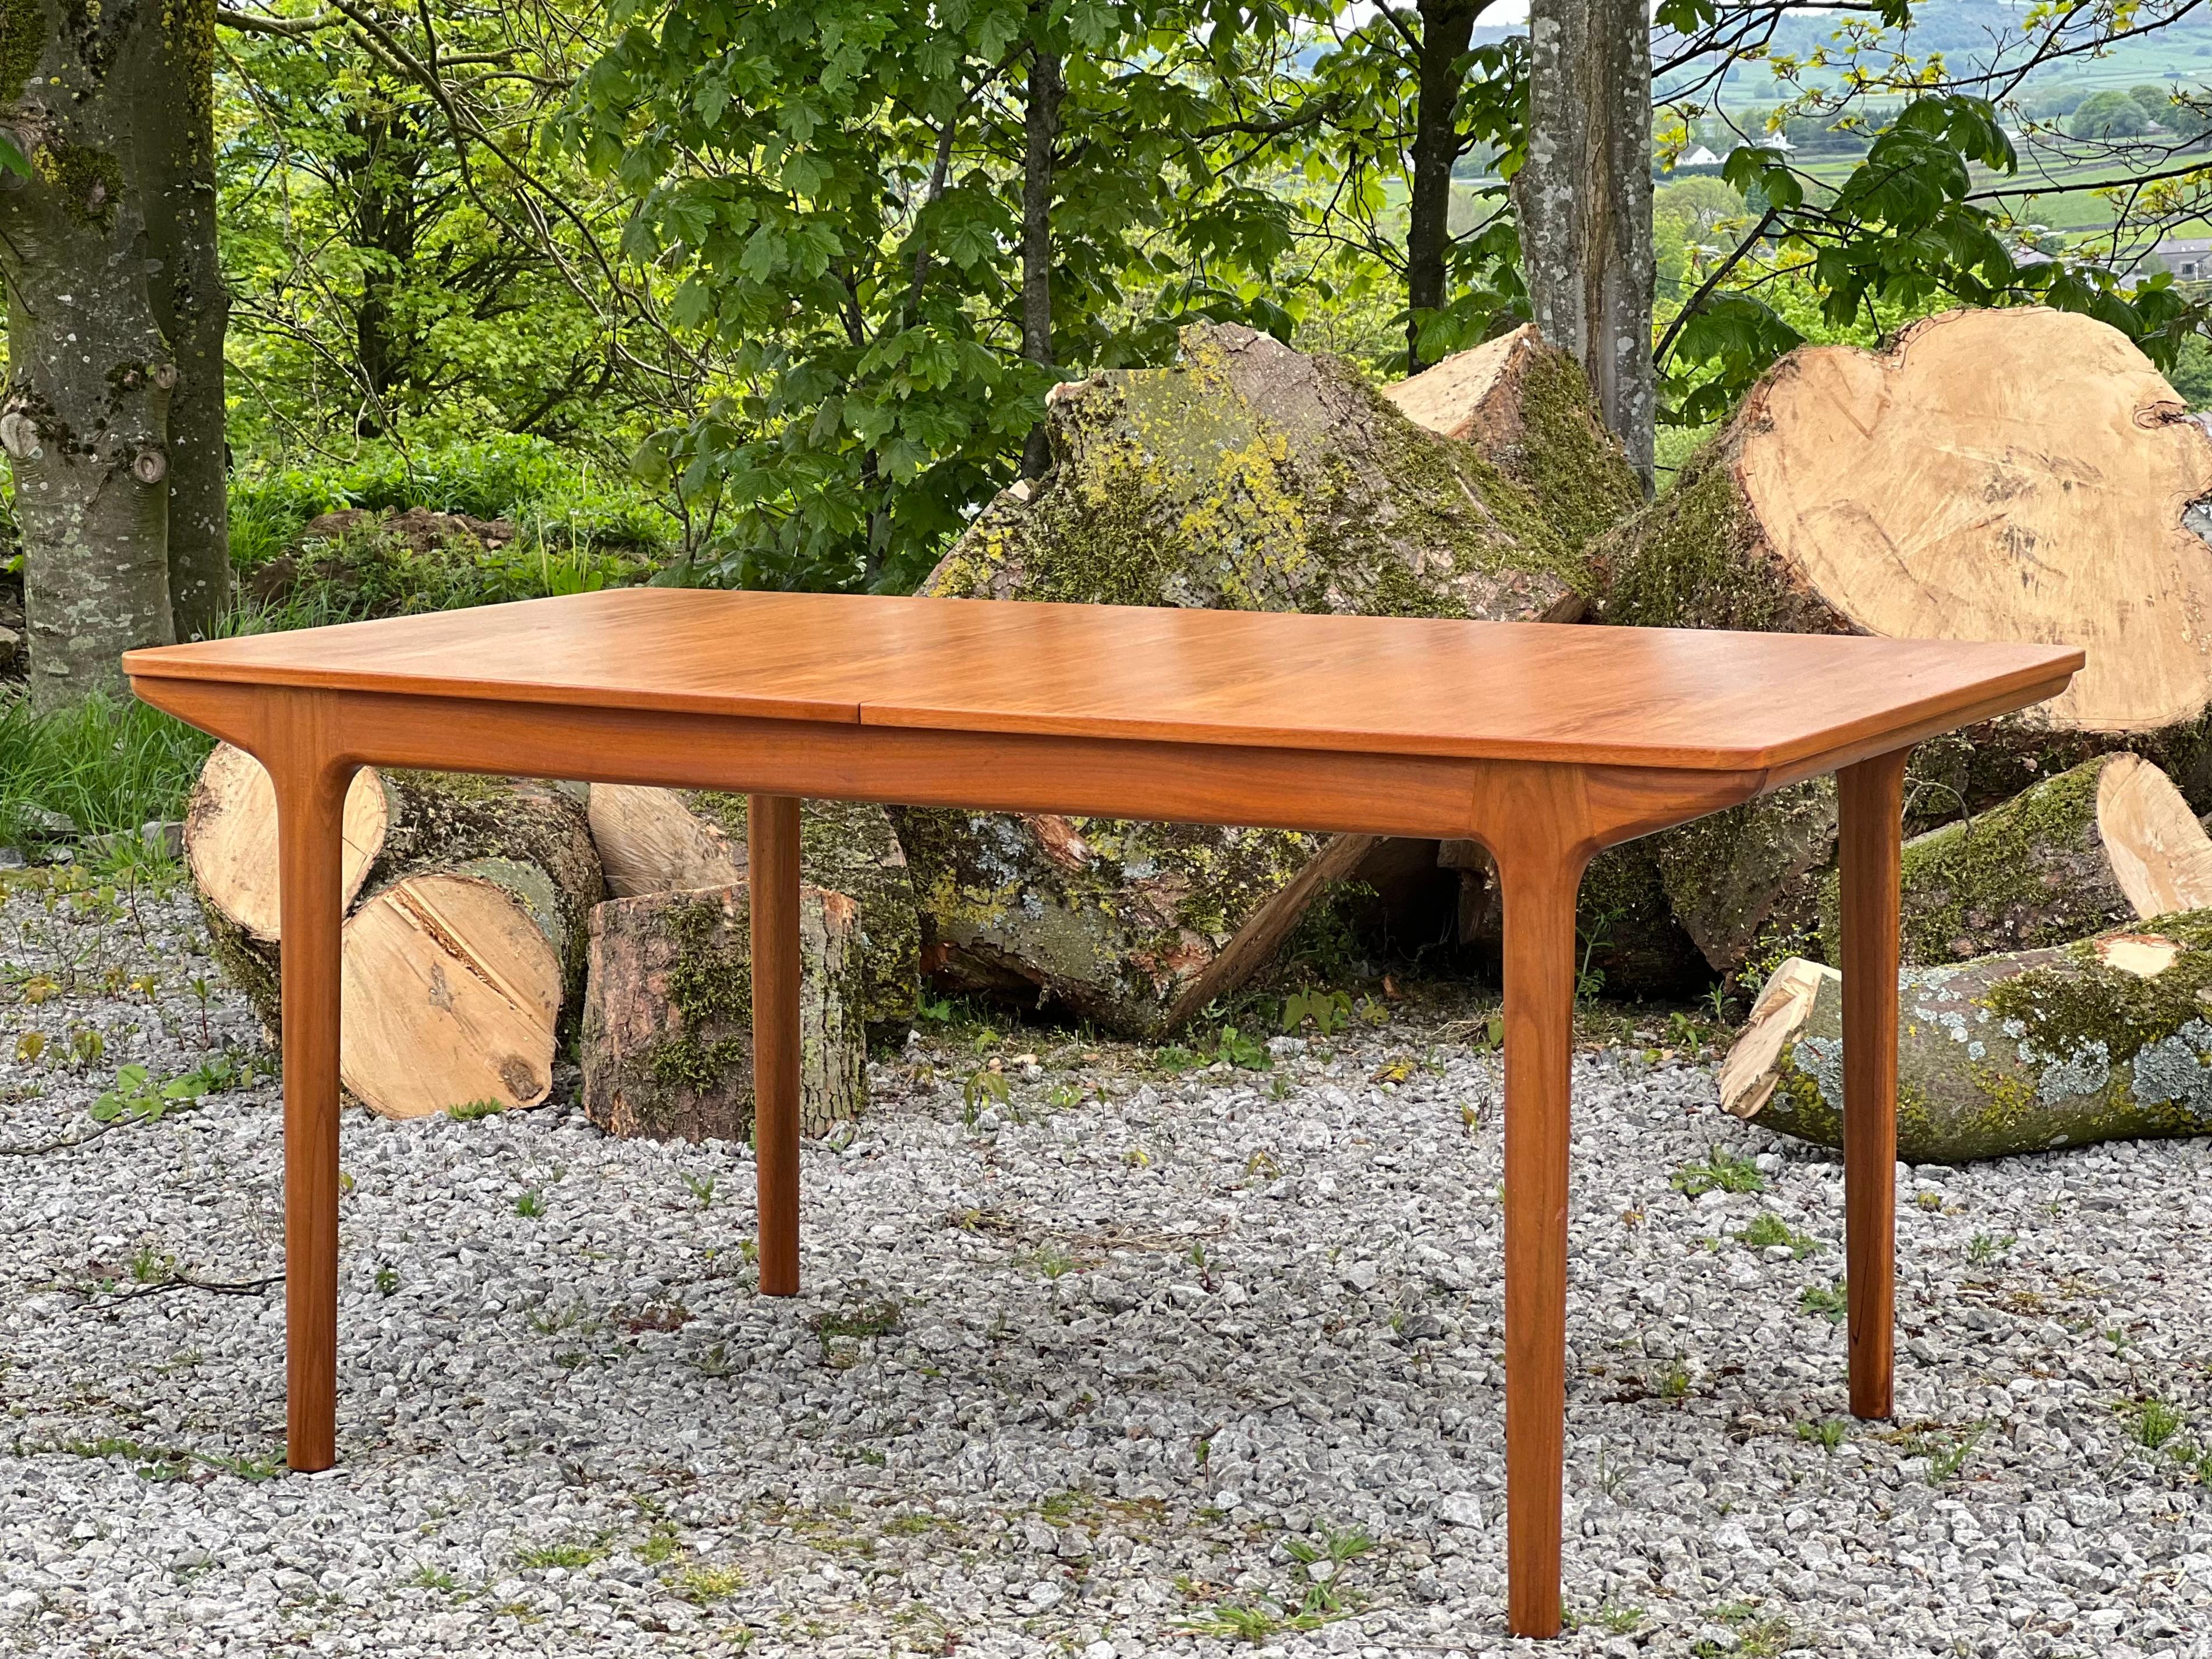 Extending dining table designed by Tom Robertson for McIntosh’s Dunvegan collection in the 70s. This piece, made of teak, keeps the original signature with the year.

This table became one of the icons of the brand, its design was patented by